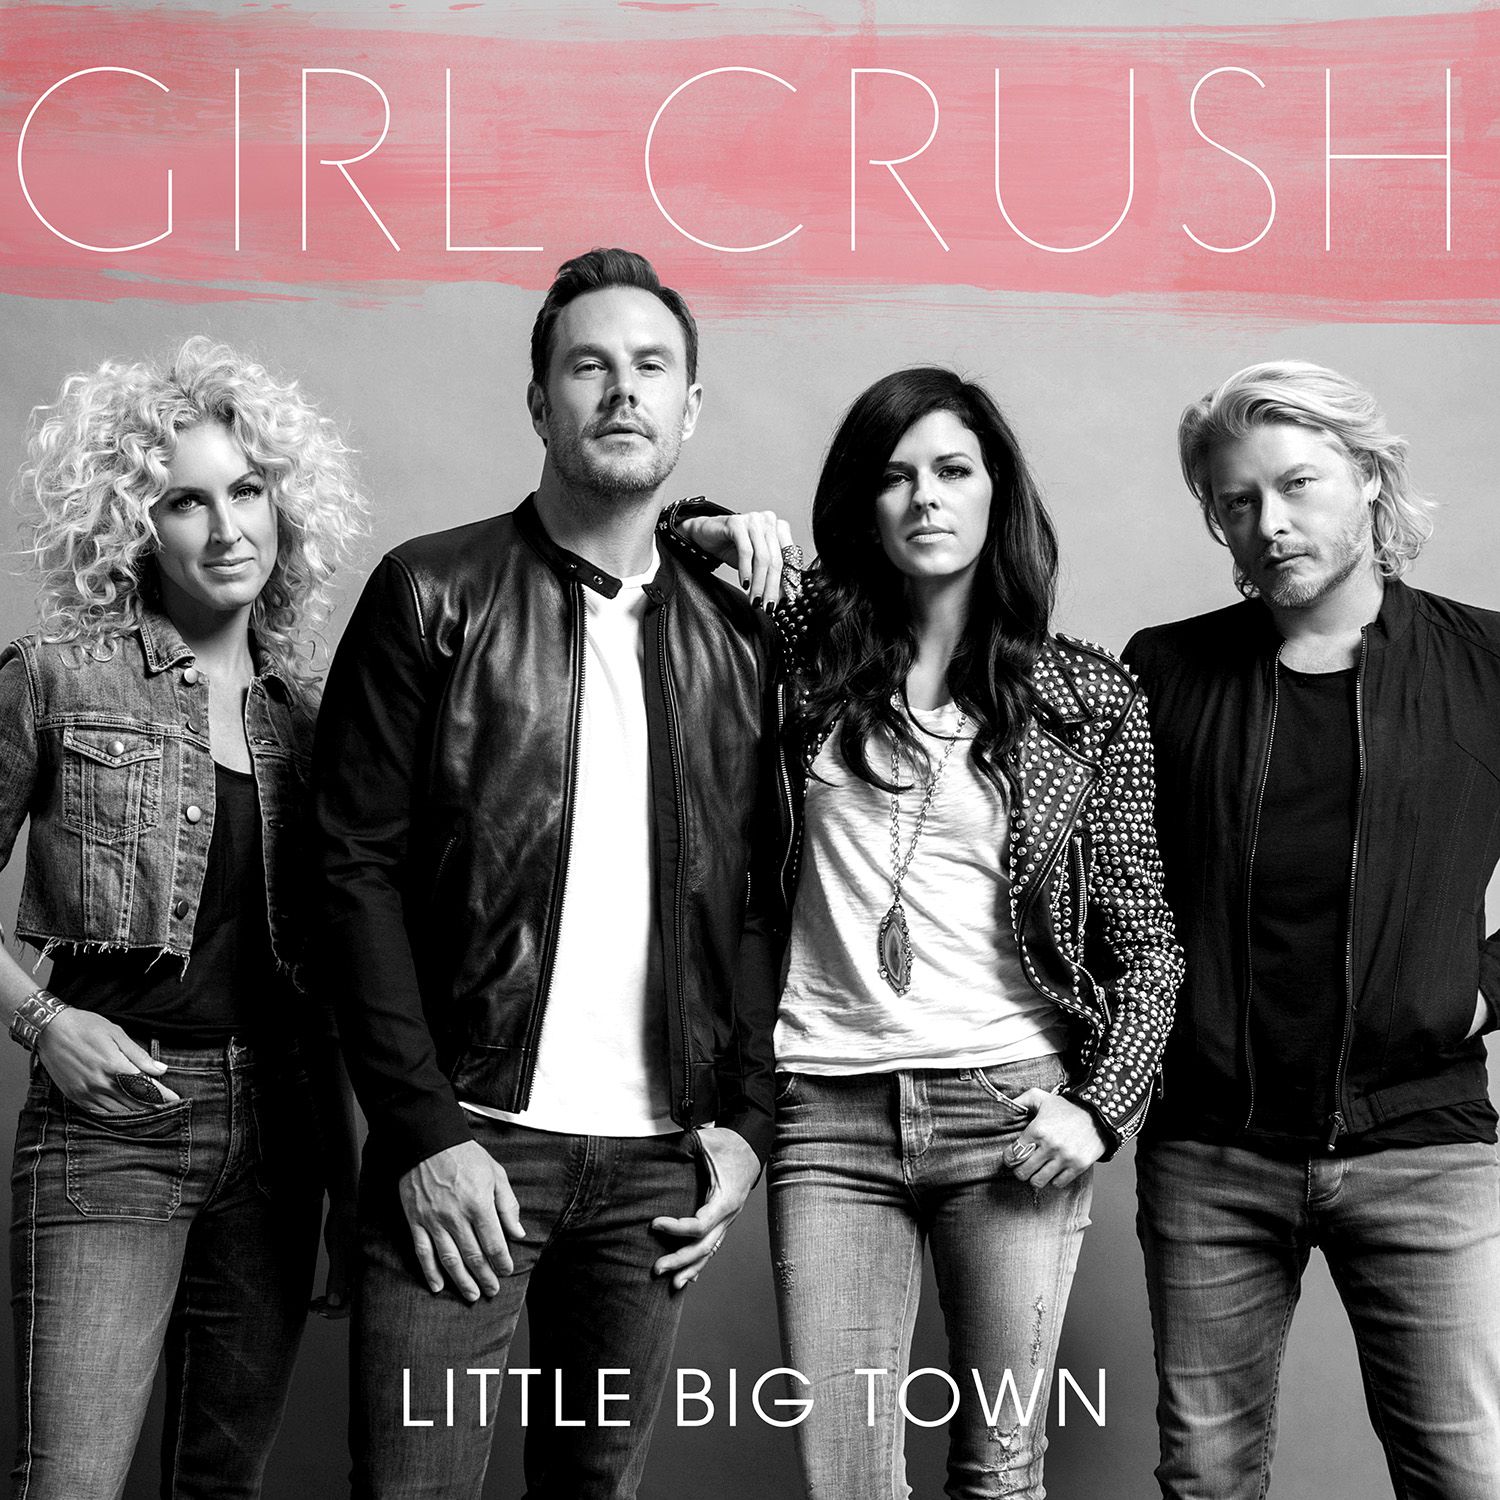 Little Big Town Experiences 2015’s Best One Week Sales of a Country Track with “Girl Crush”